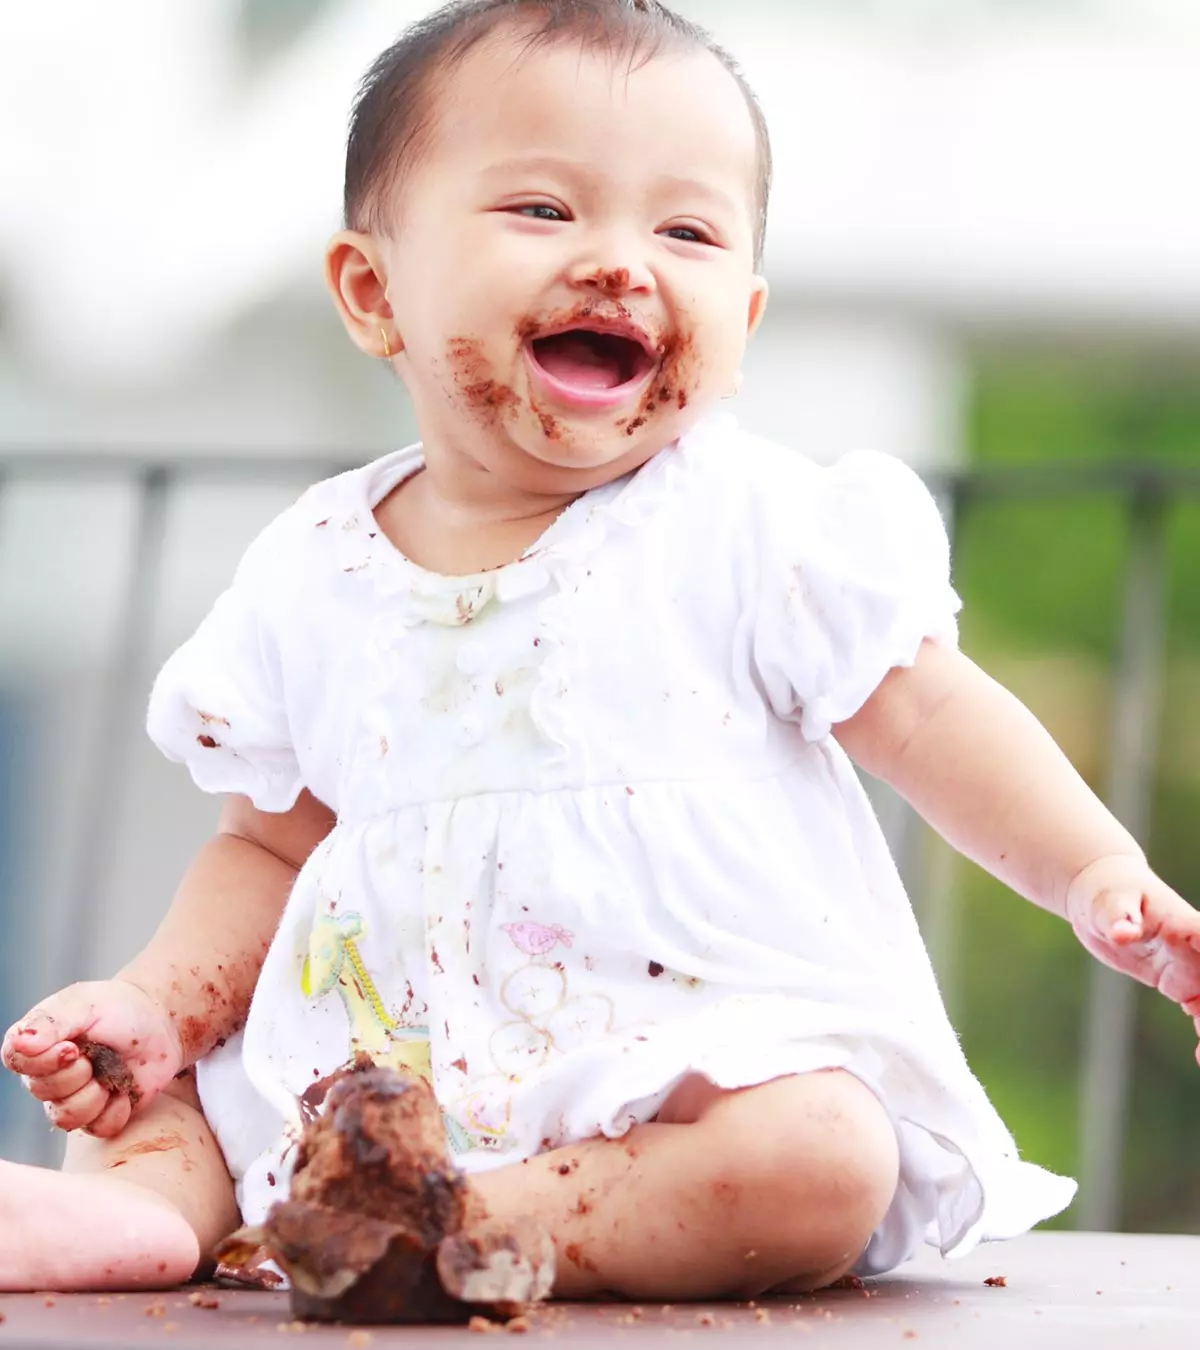 When Can Babies Have Chocolate And Does It Cause Any Problems